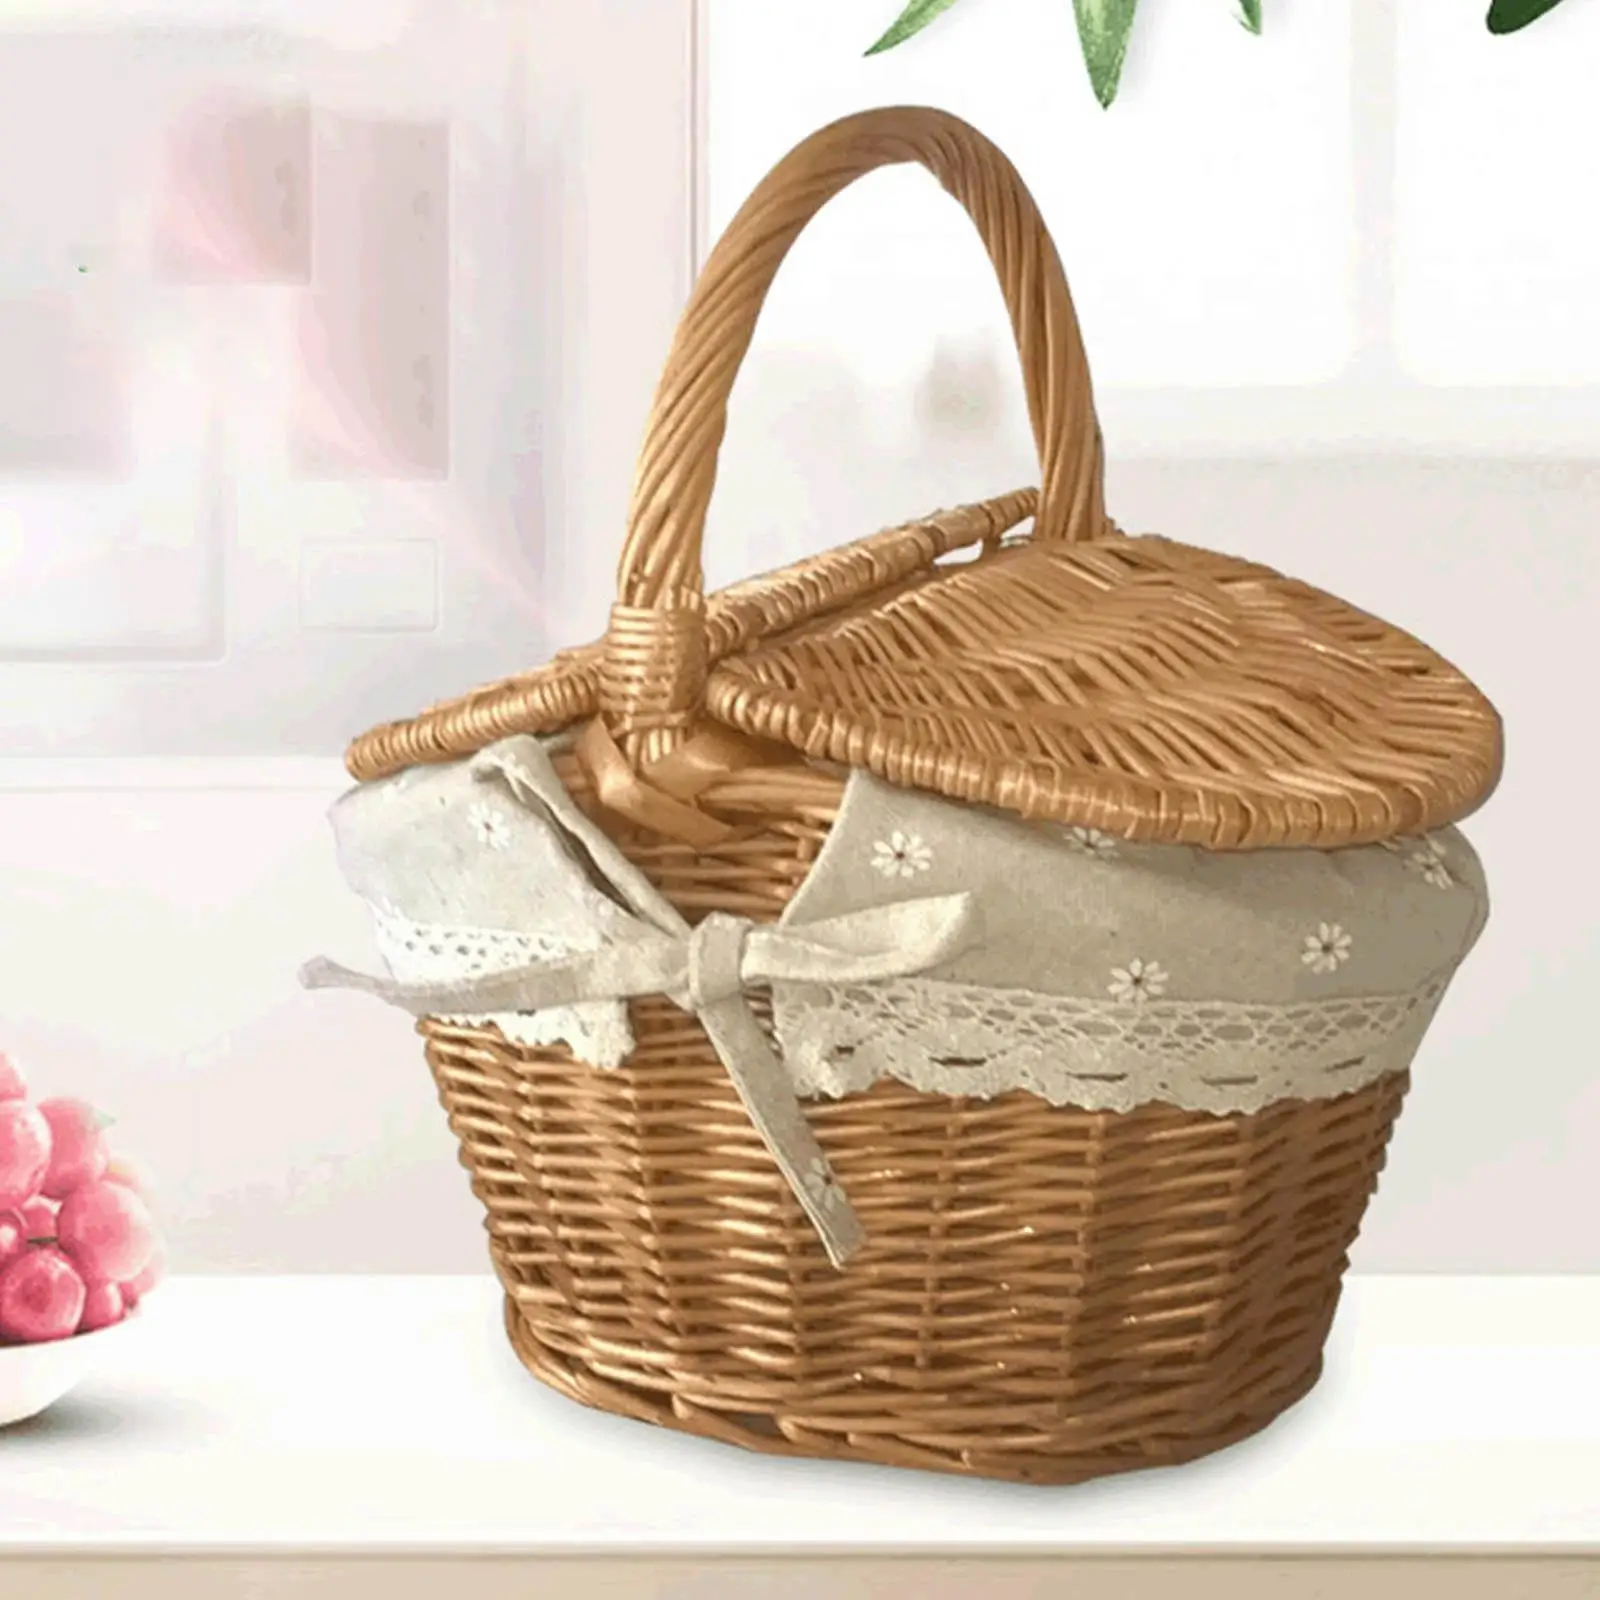 Rustic Wicker Picnic Basket with Washable Lining Rattan Storage Serving Basket for Outdoor Beach Hiking Camping